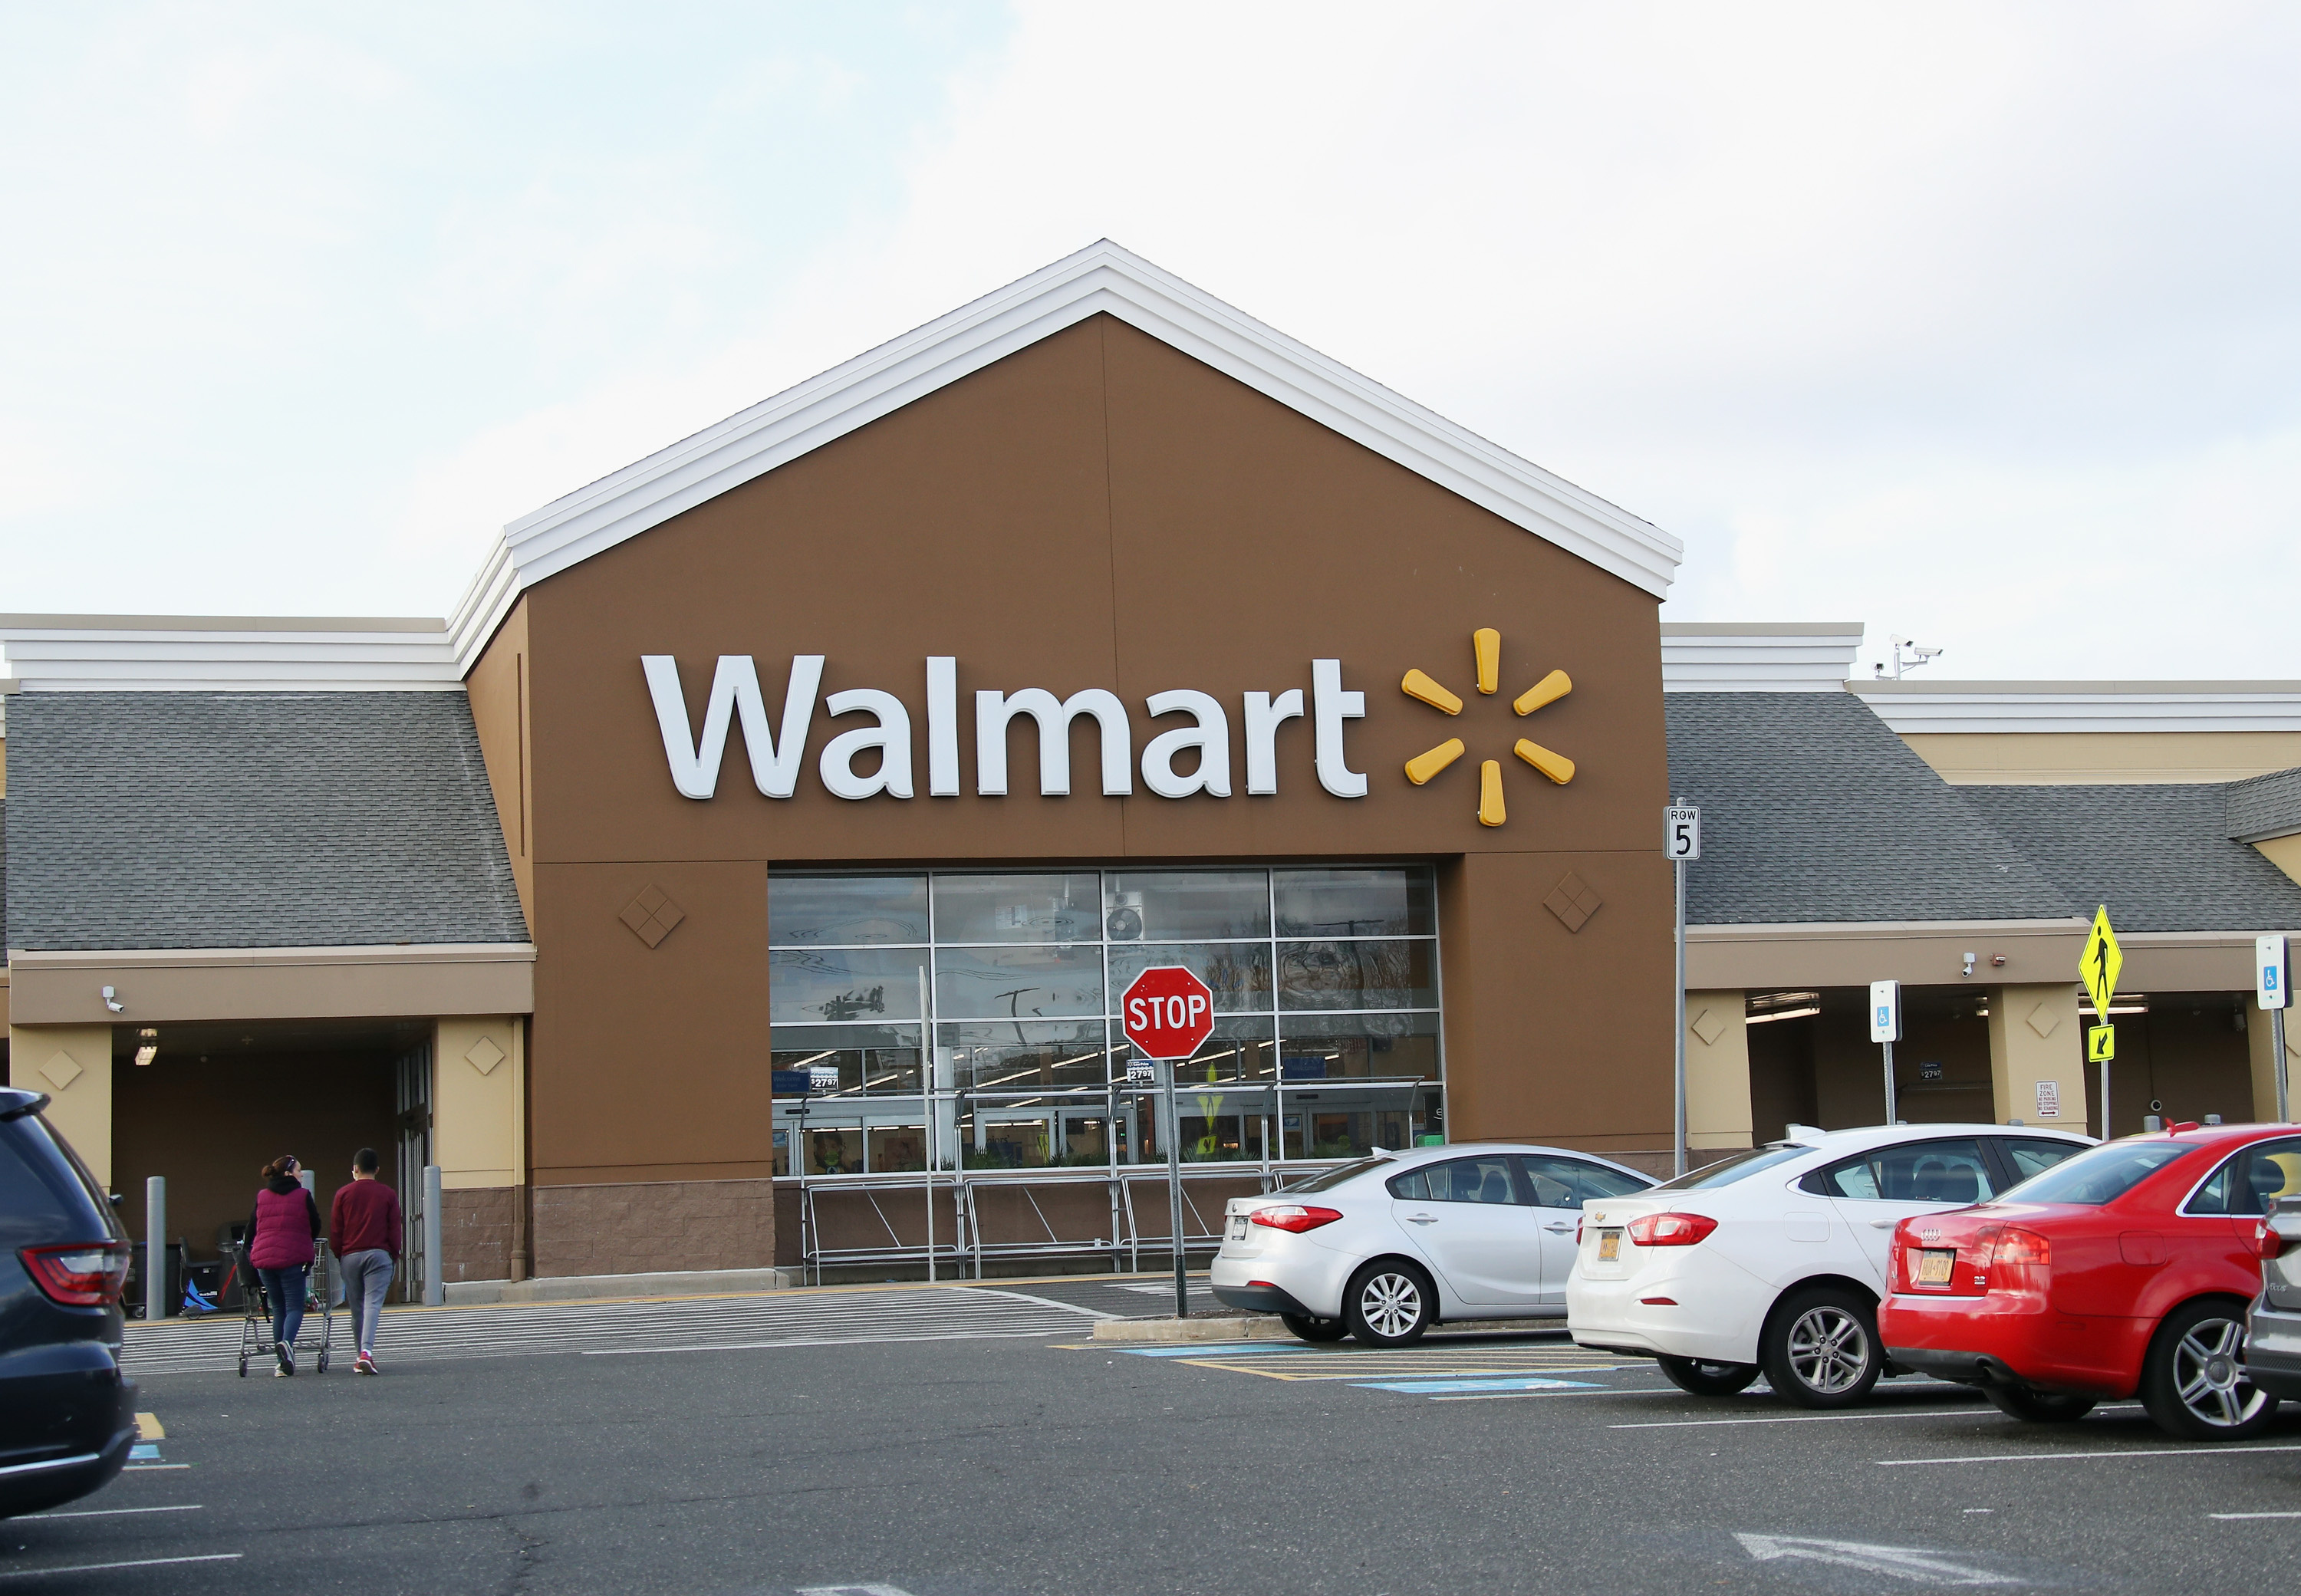 Walmart: The world’s leading retailer, The first store opened in 1950 in Bentonville, Arkansas. 3000x2090 HD Wallpaper.